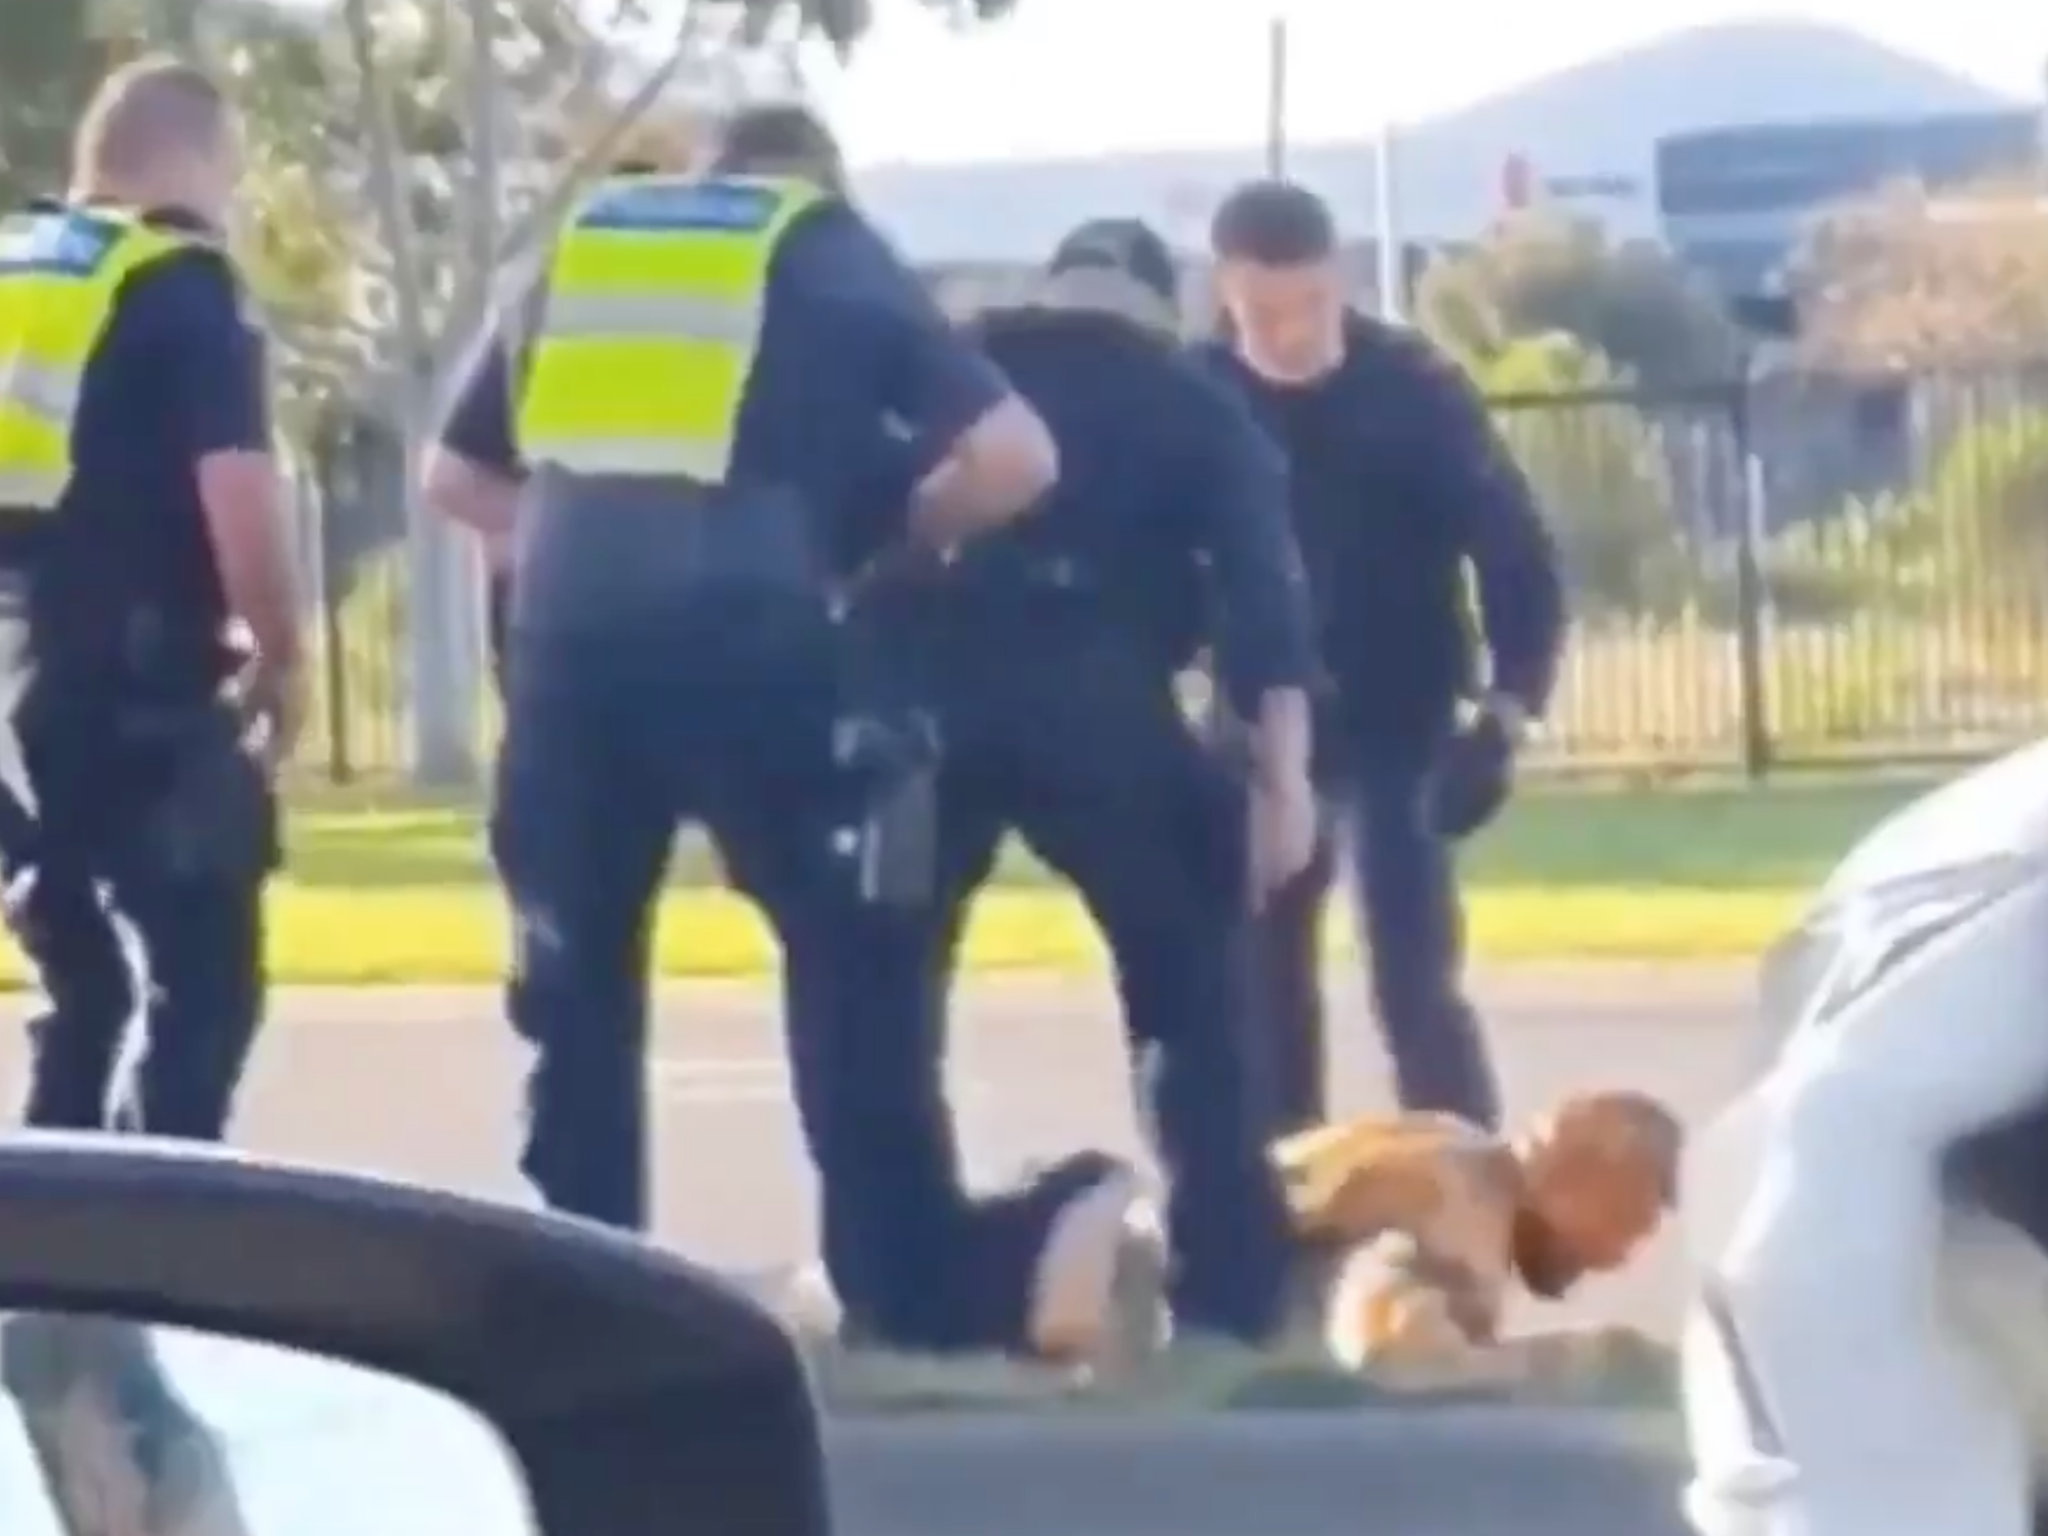 Victoria Police officers surround a man on the ground after hitting him with a police car